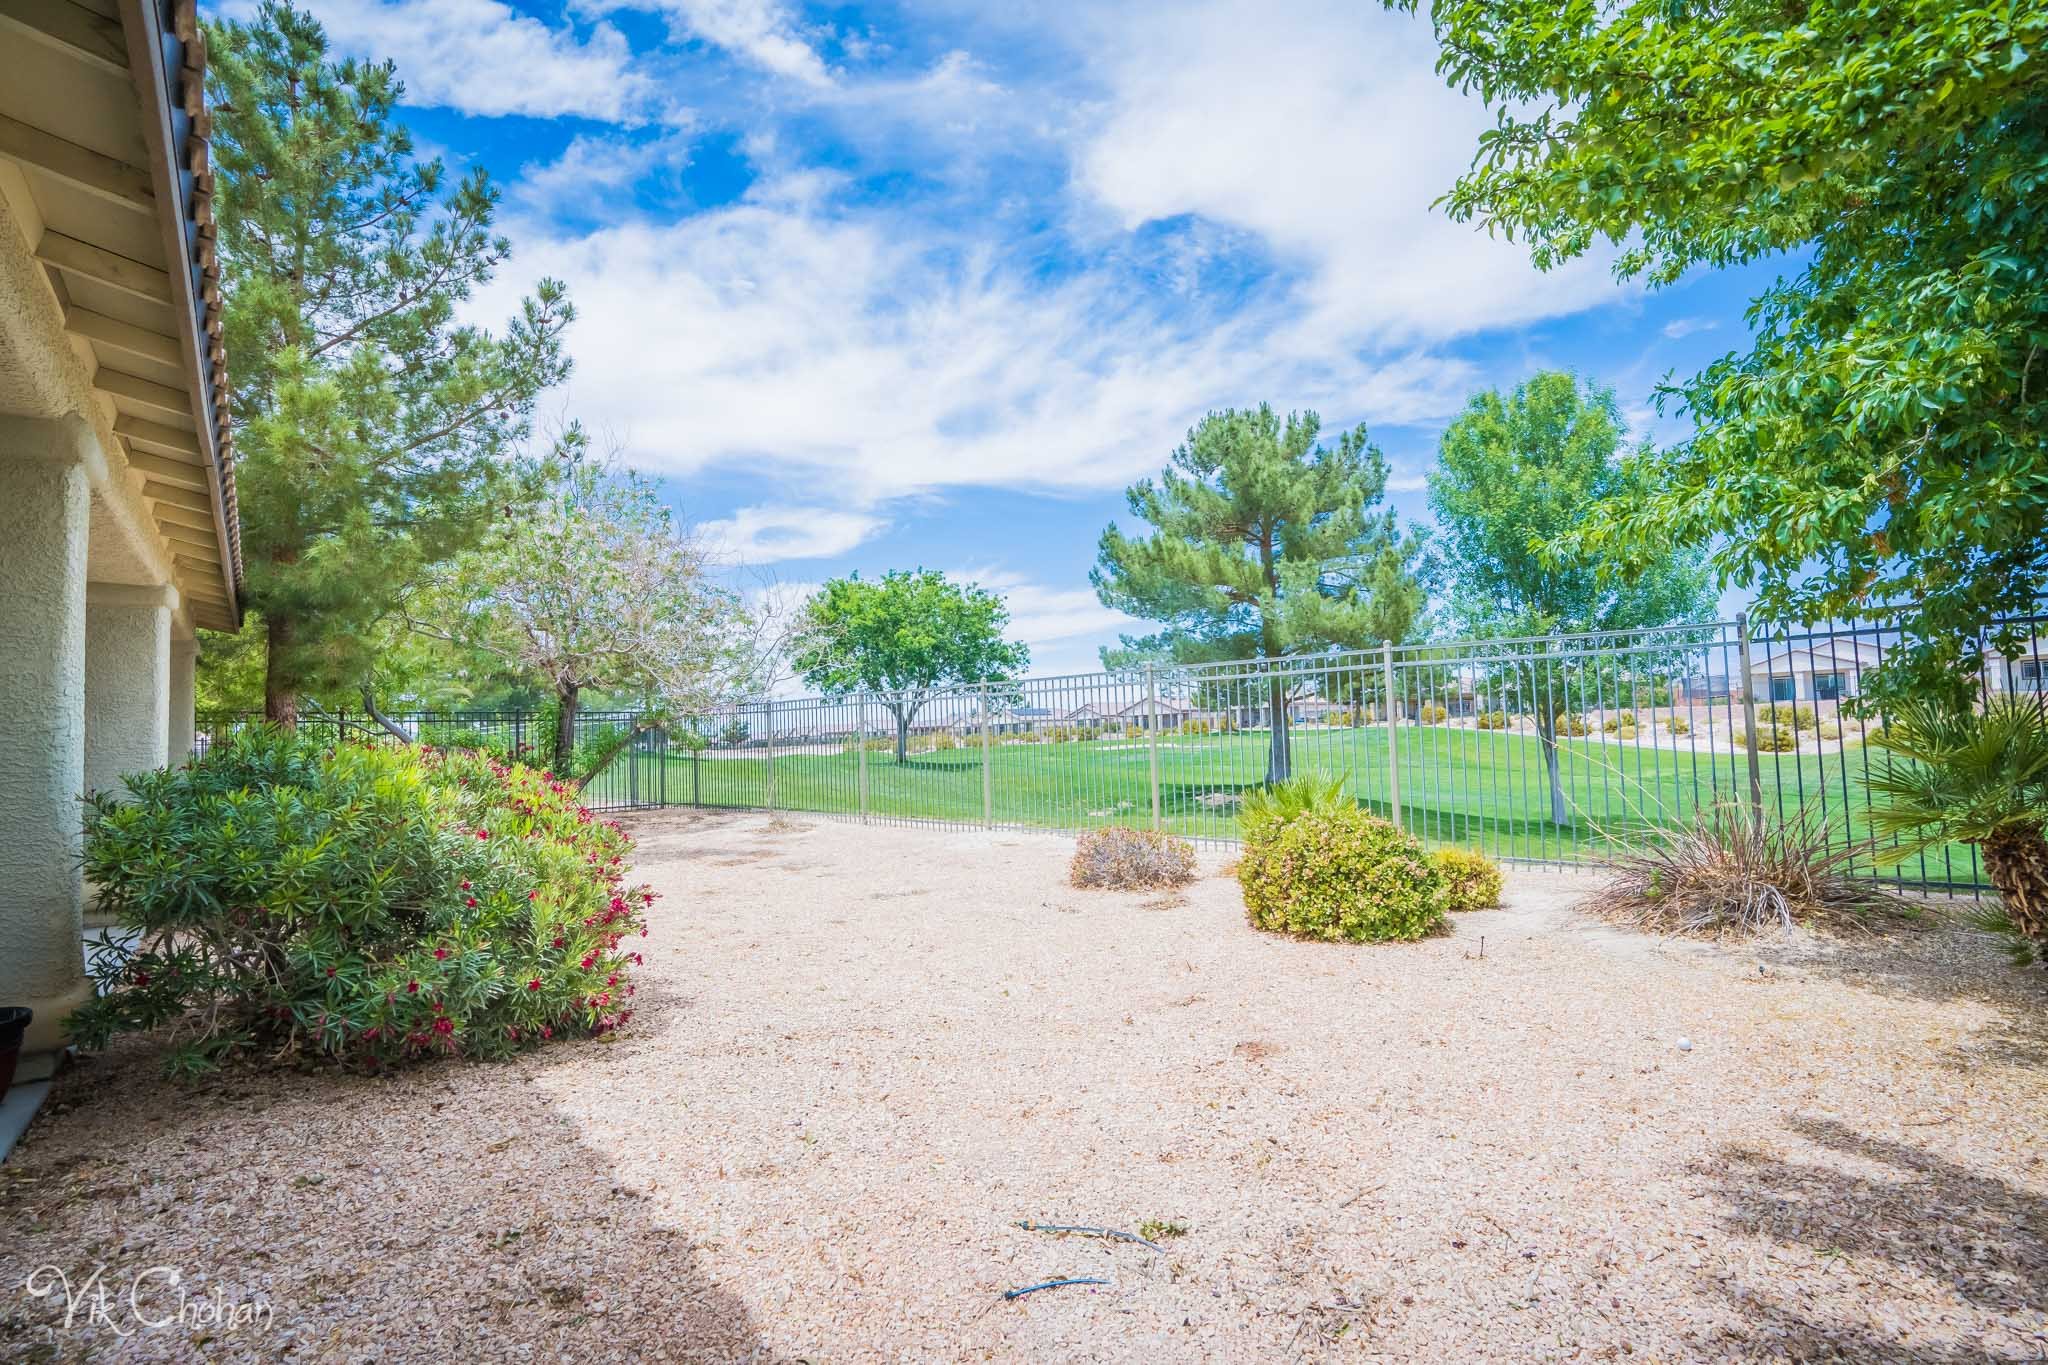 2022-05-15-5378-E-Cansano-St-Pahrump-Real-Estate-Photography-Virtual-Tour-Drone-Photography-Vik-Chohan-Photography-Photo-Booth-Social-Media-VCP-082.jpg